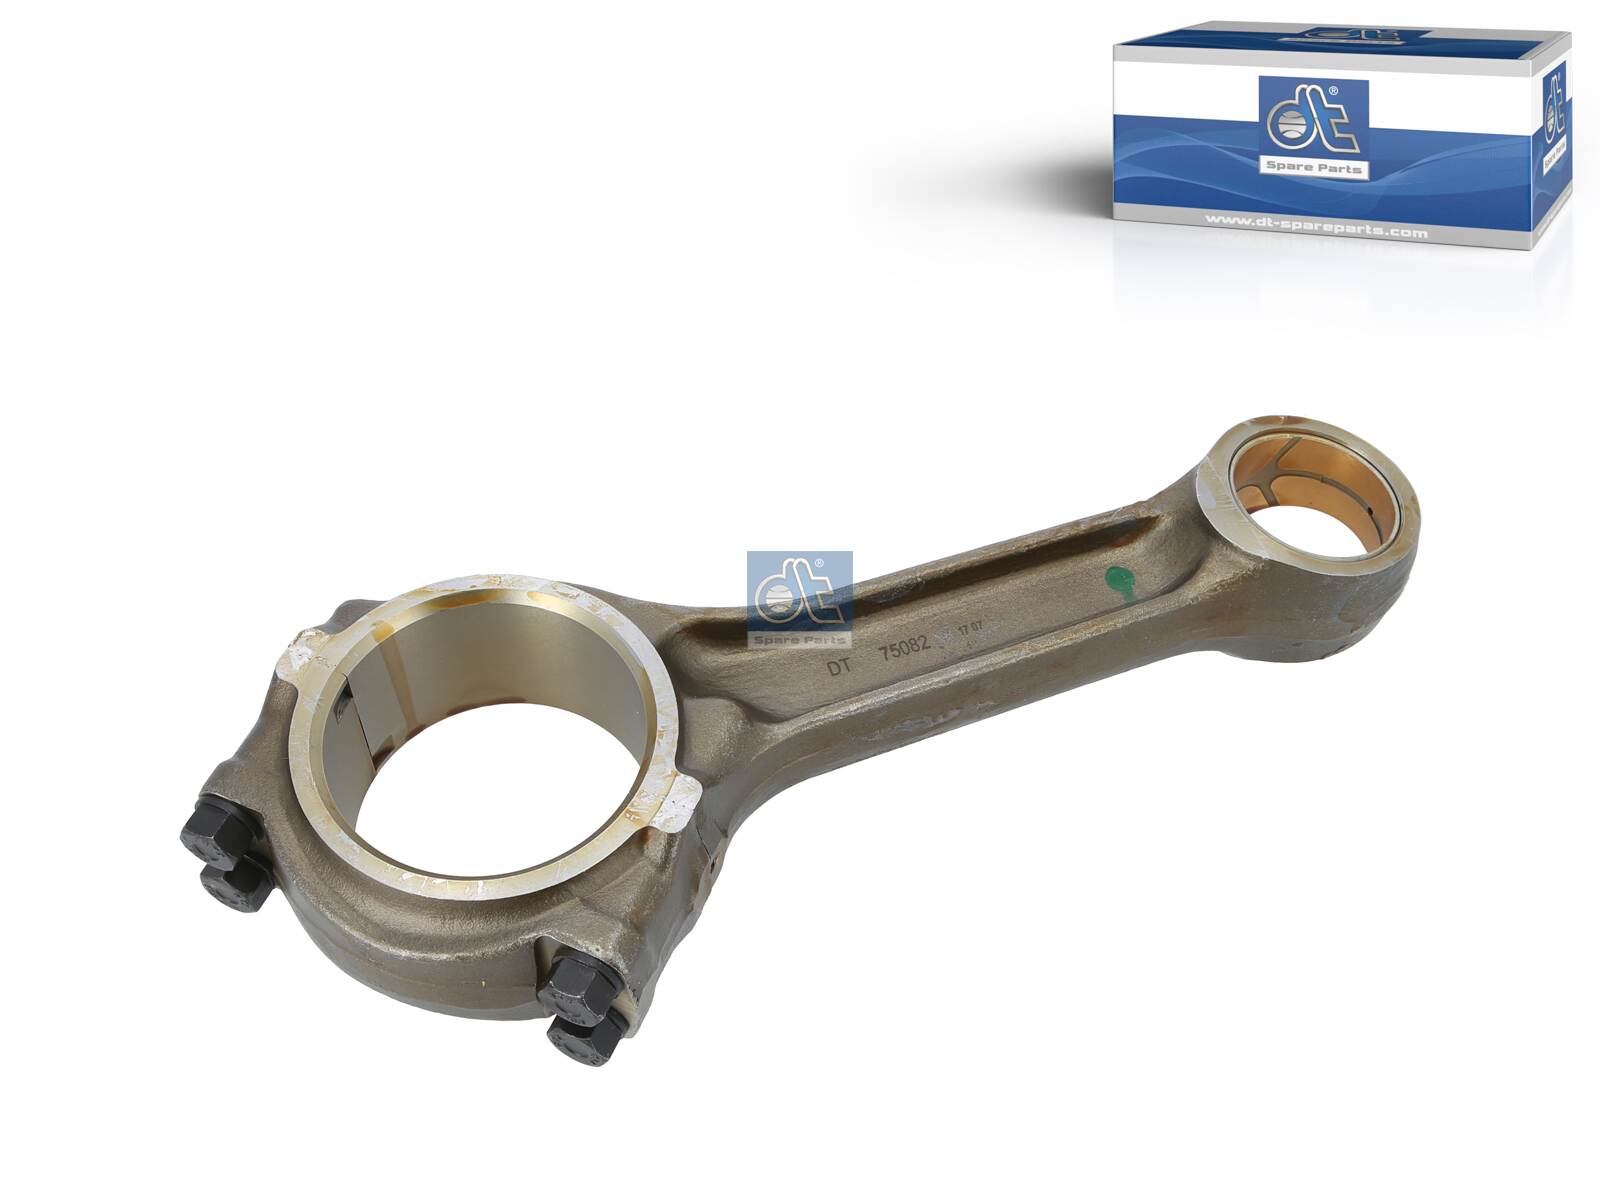 1.10701, Connecting Rod, DT Spare Parts, 1304357, 1397336, 1403521, 225454, 258103, 318062, 326379, 0280111, 04.11.019, 046.336, 050310110001, 103438, 11693, 40600, 20060711002